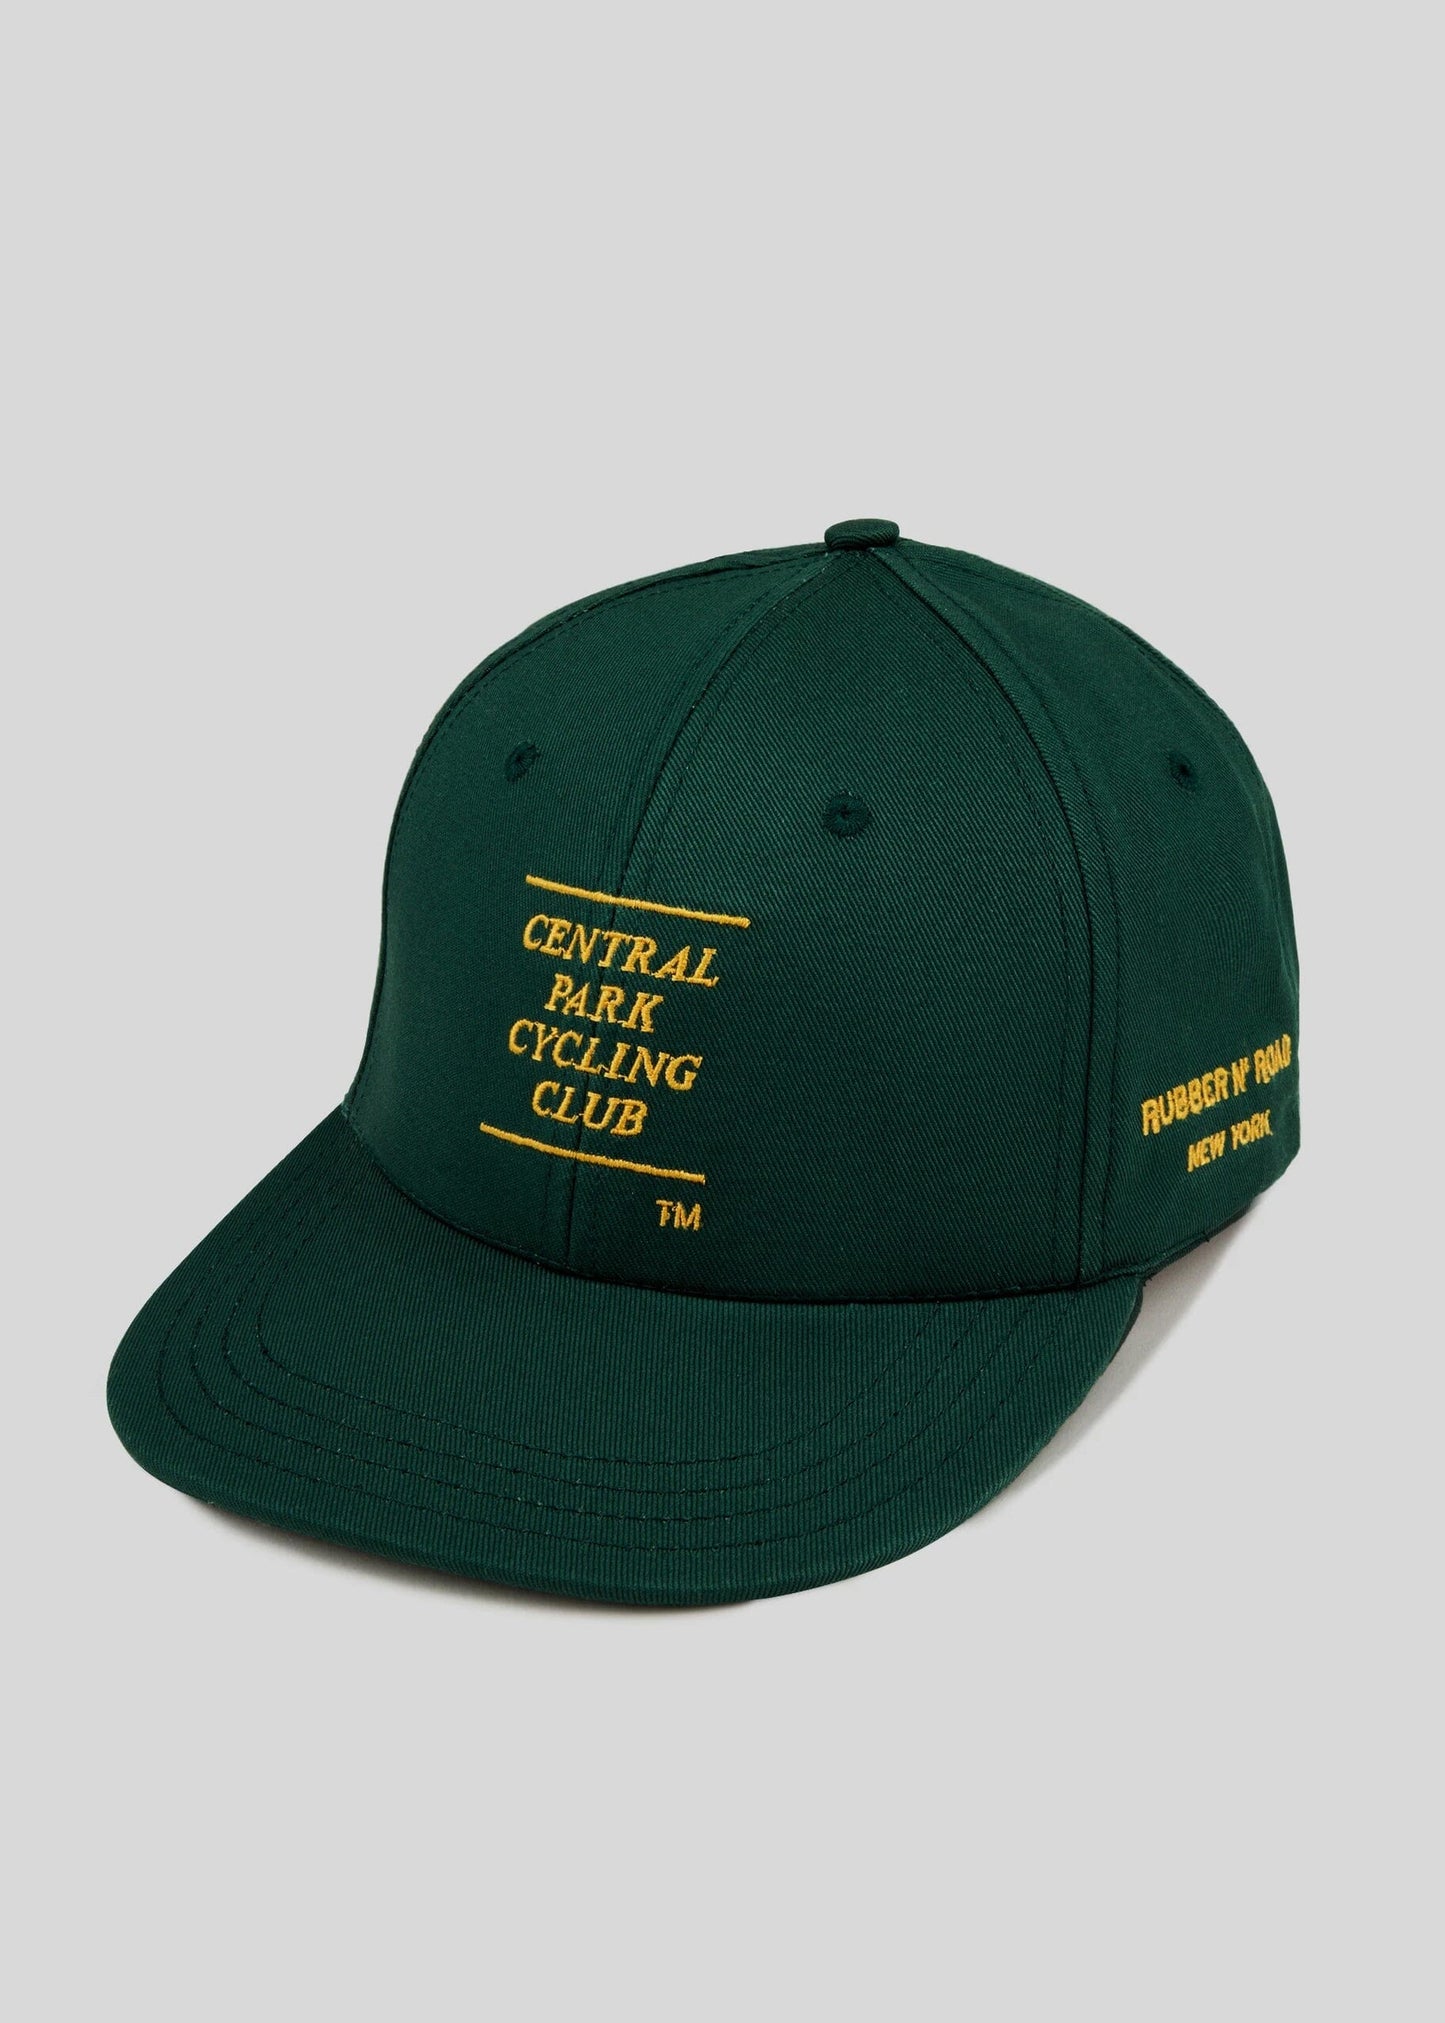 Rubber N' Road - Central Park Cycling Club Cap Rubber N' Road Casual Caps 